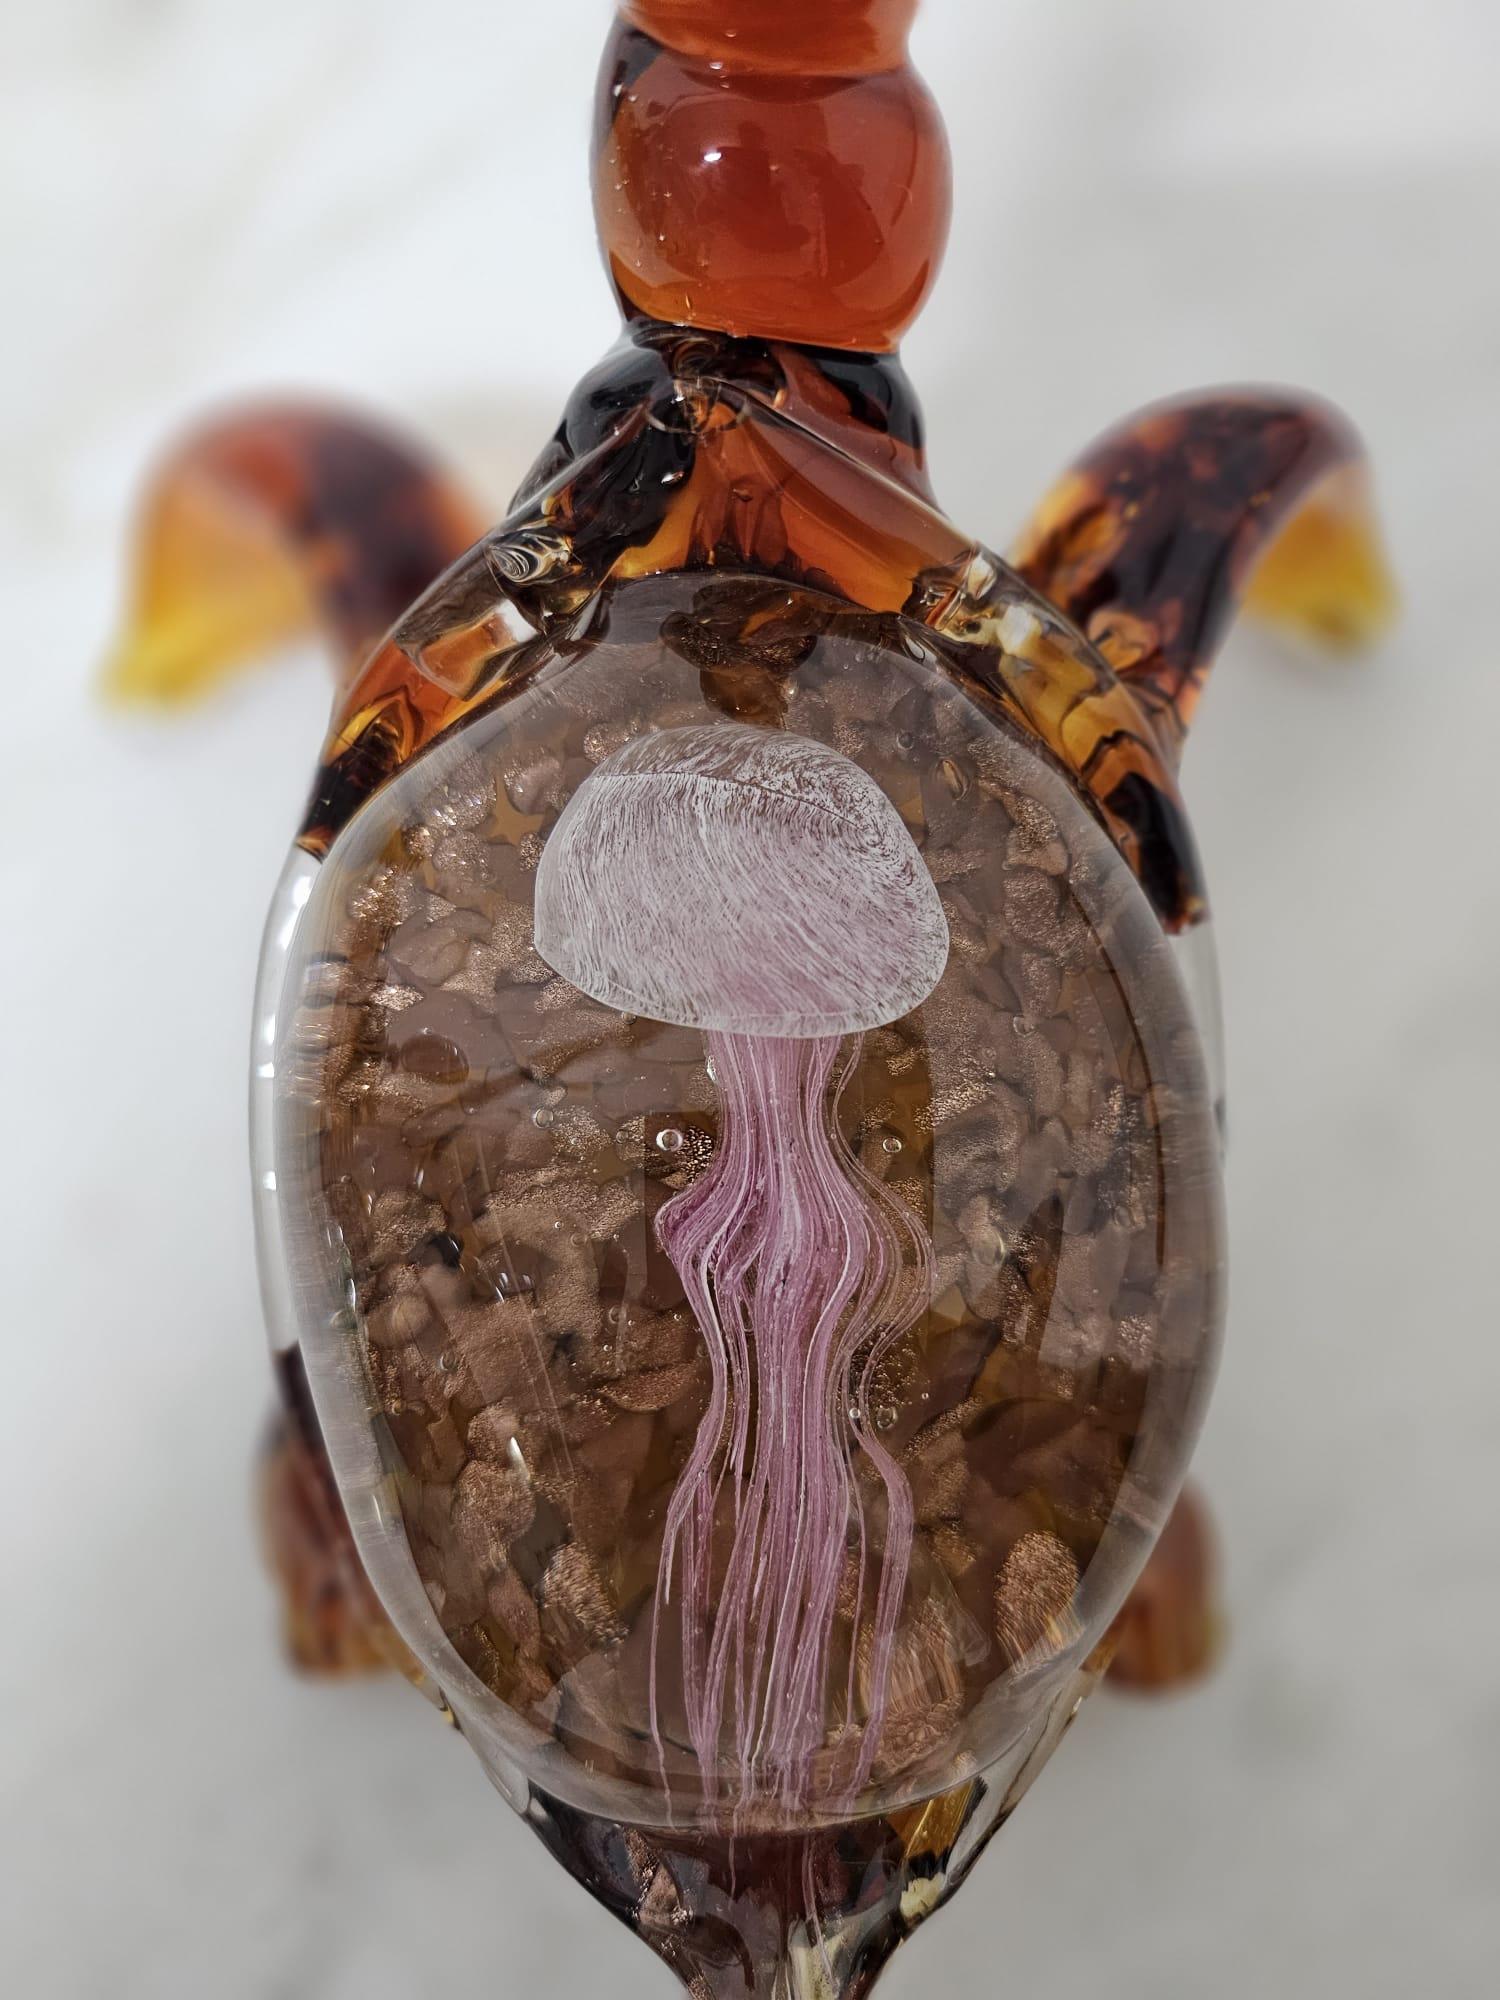 Murano glass turtle, jellyfish inside the shell, 1970s
Very particular polychrome object in Murano glass. Turtle with a jellyfish inside its shell.
Excellent condition, always belonged to my family. My grandfather bought it during his honeymoon.
